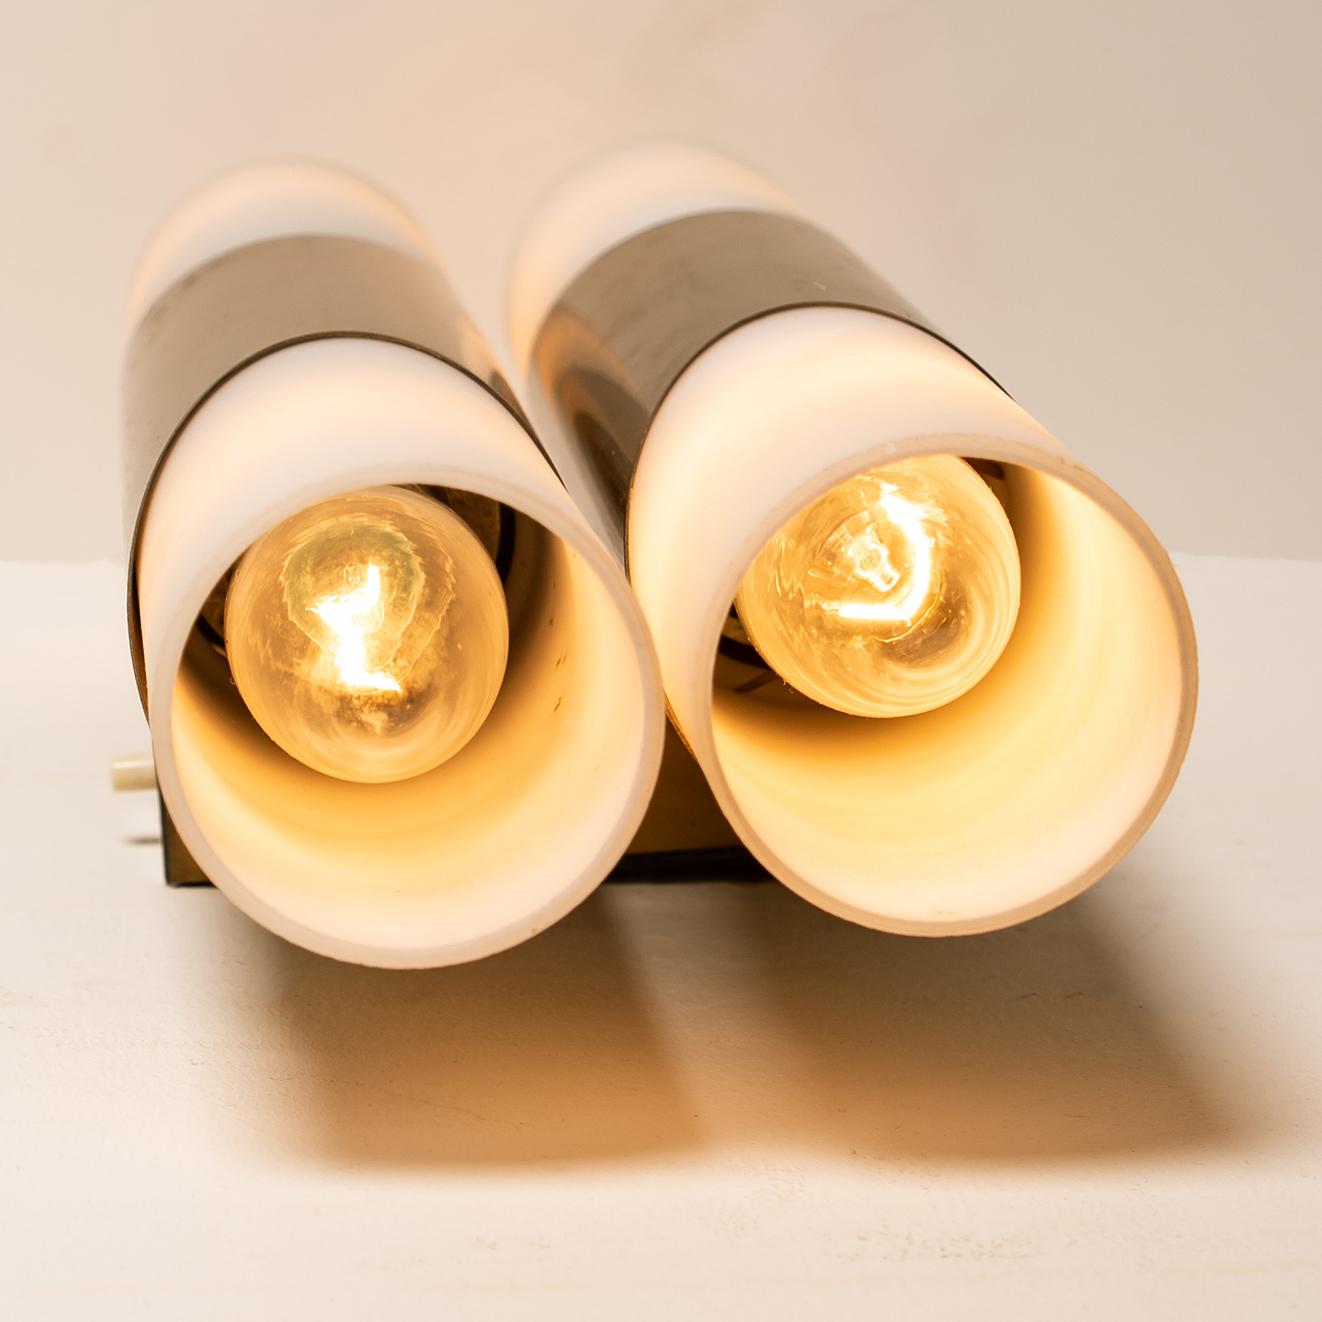 Dutch Pair of Wall Sconces or Wall Lights in the Style of RAAK, Amsterdam, 1970